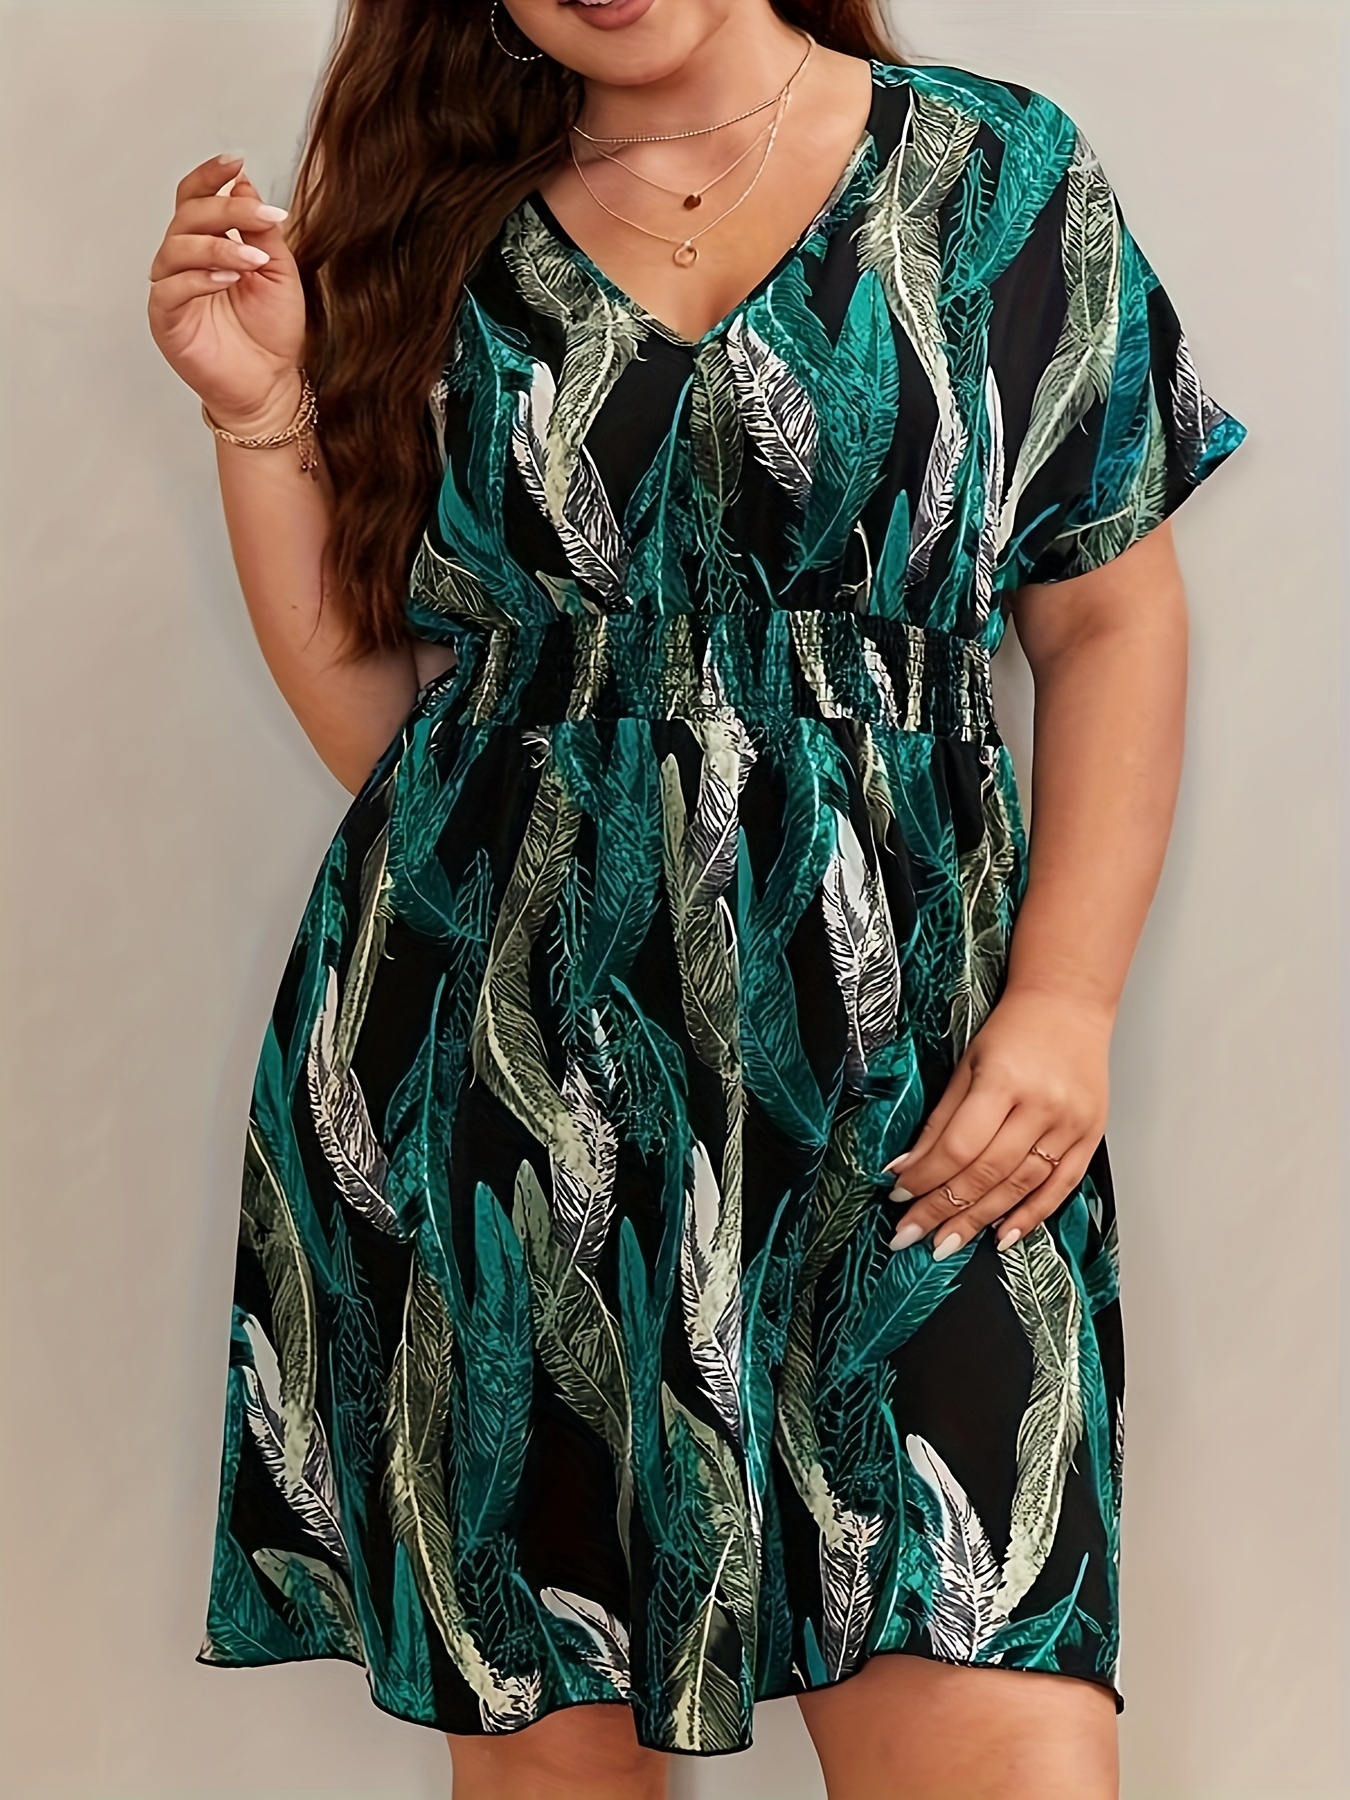 Sale & Clearance Women's Plus Size Clothing